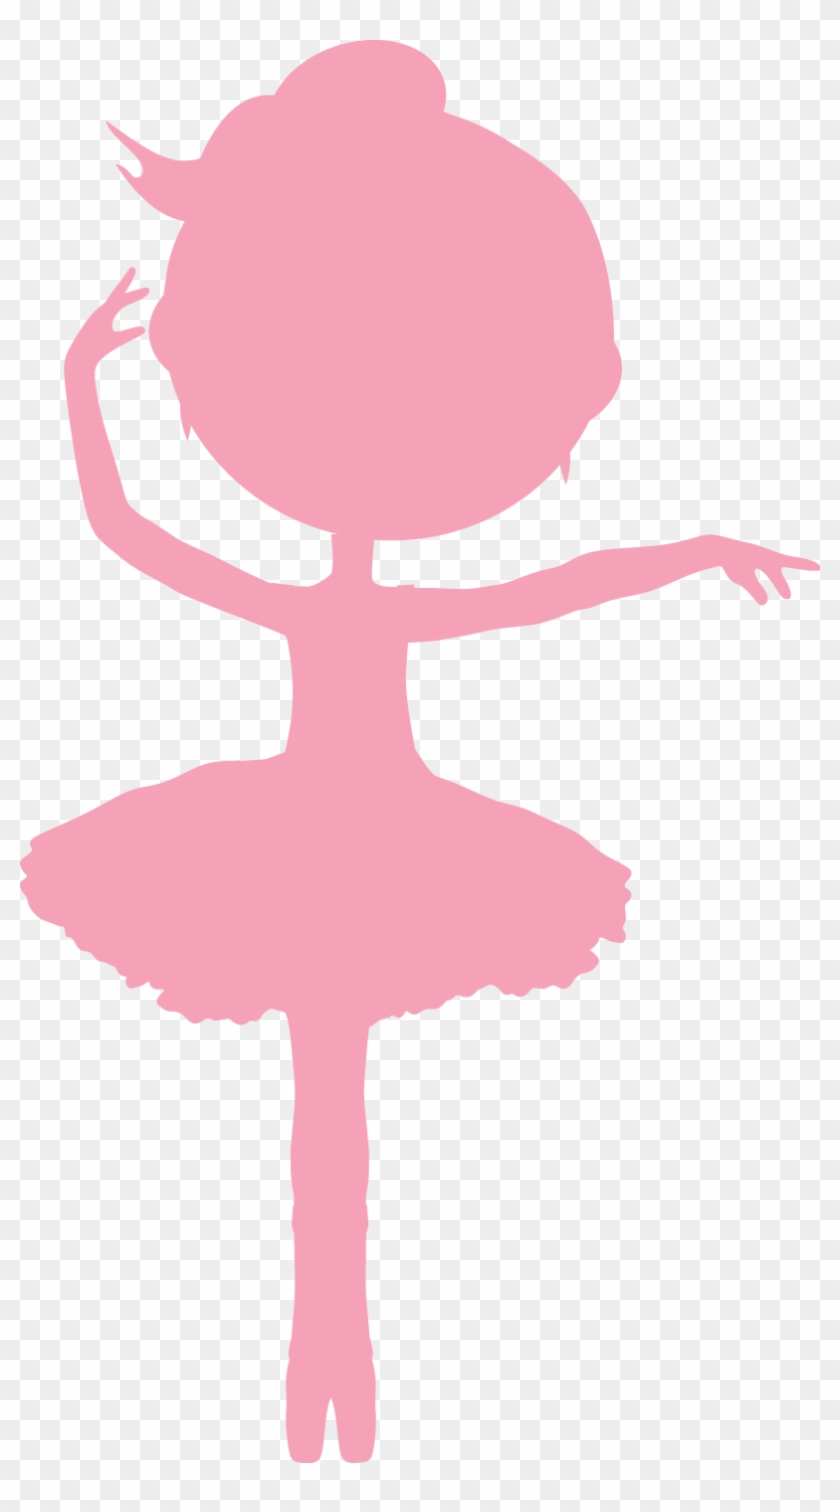 Tiny Tutus Dance Center In Moorestown, Nj Offers A - Decal #340066